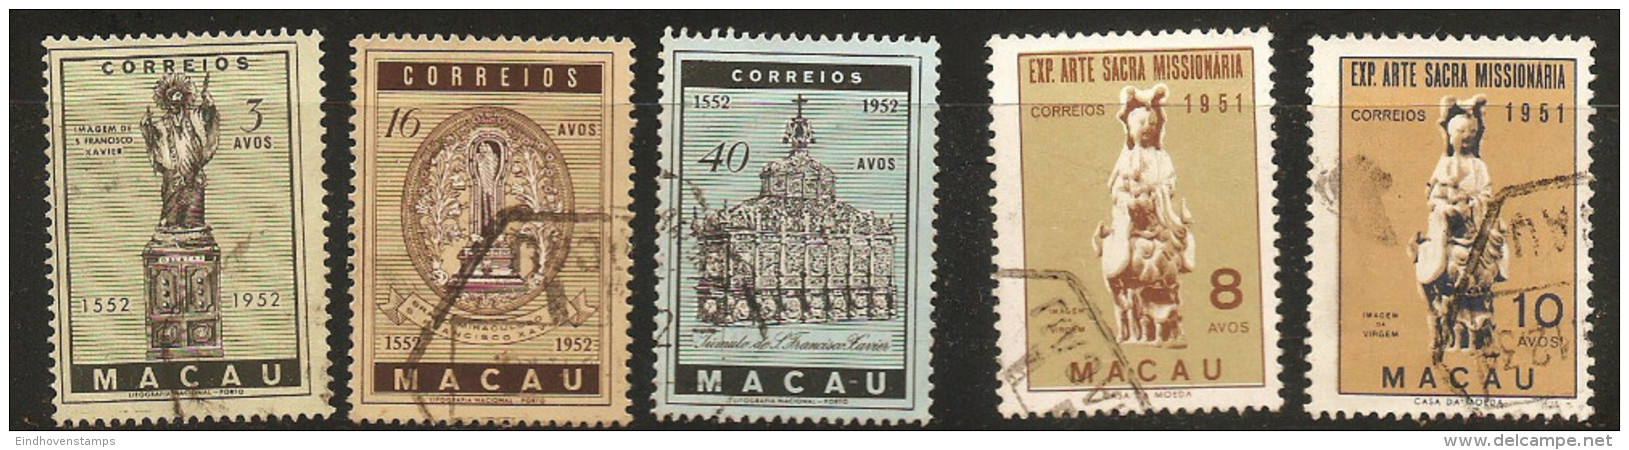 Macao 1952-53 Jesuit Francisco Xavier Death Anniversary & Mission 5 Values Portuguese Colony - Christianity